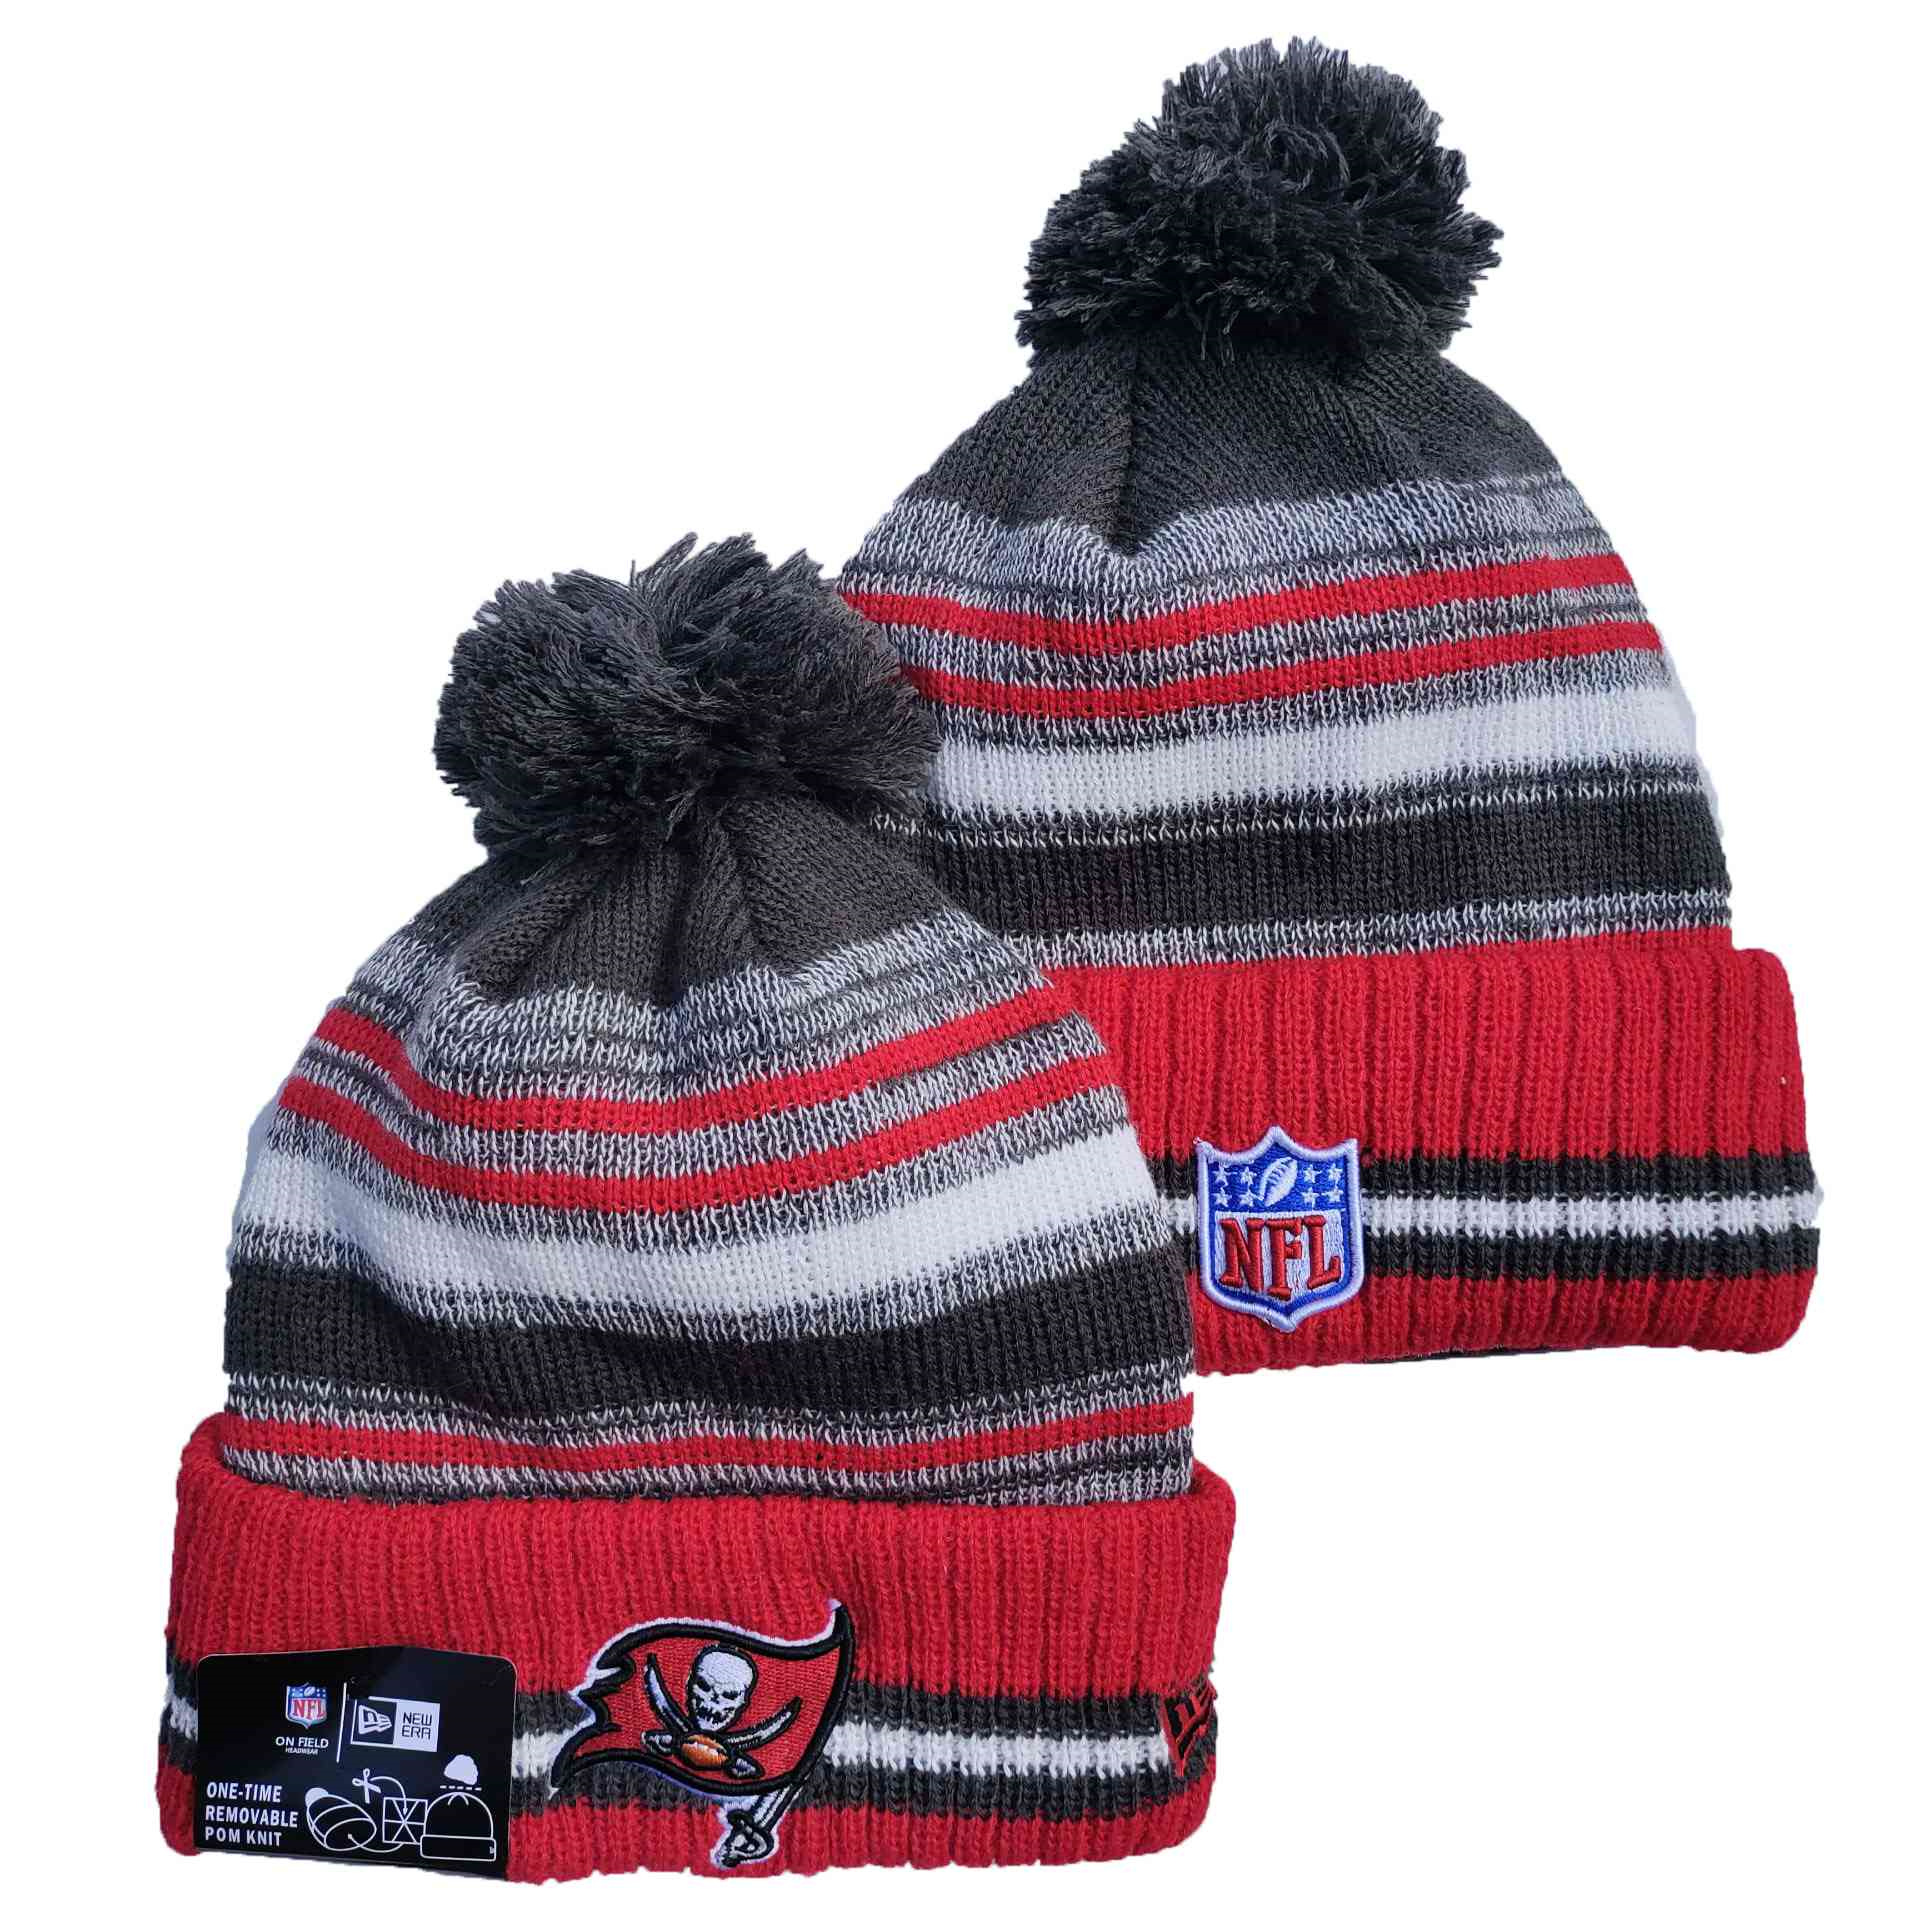 Tampa Bay Buccaneers Knit Hats 02160